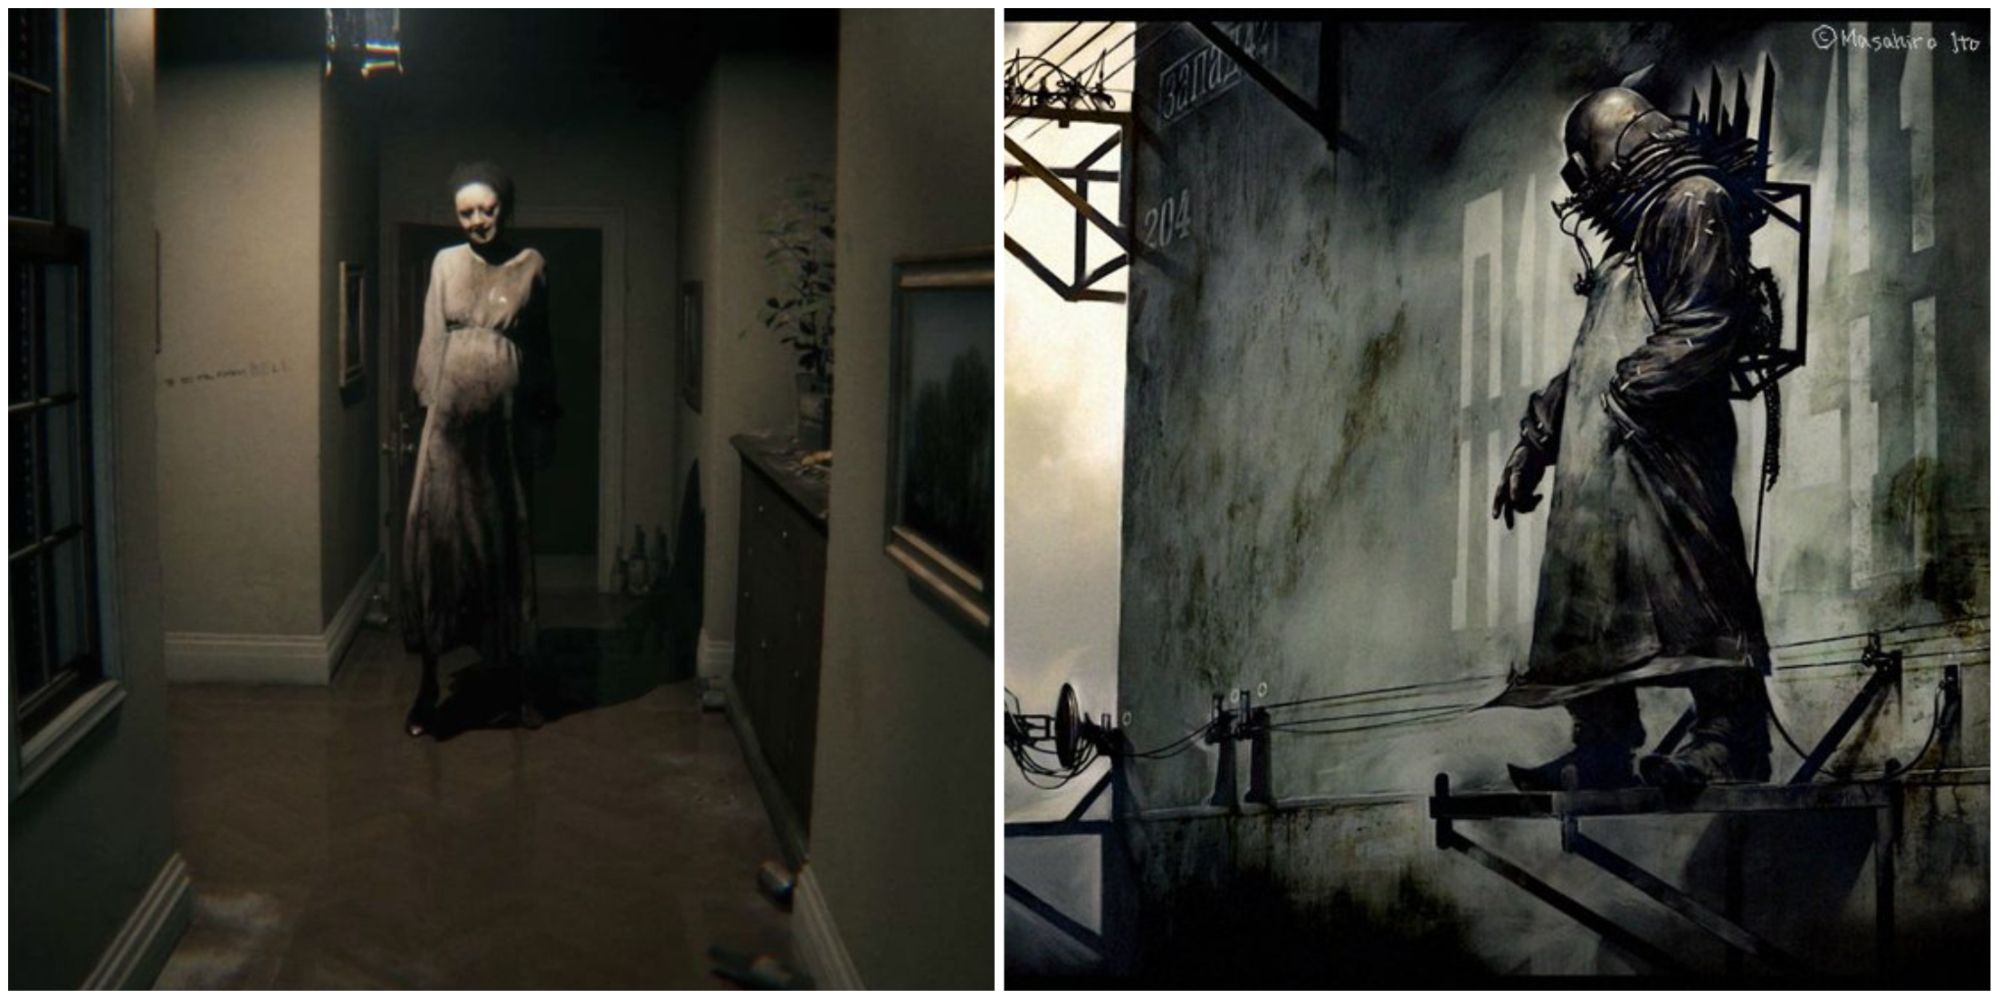 P.T. - The greatest horror game that never released. If your a fan